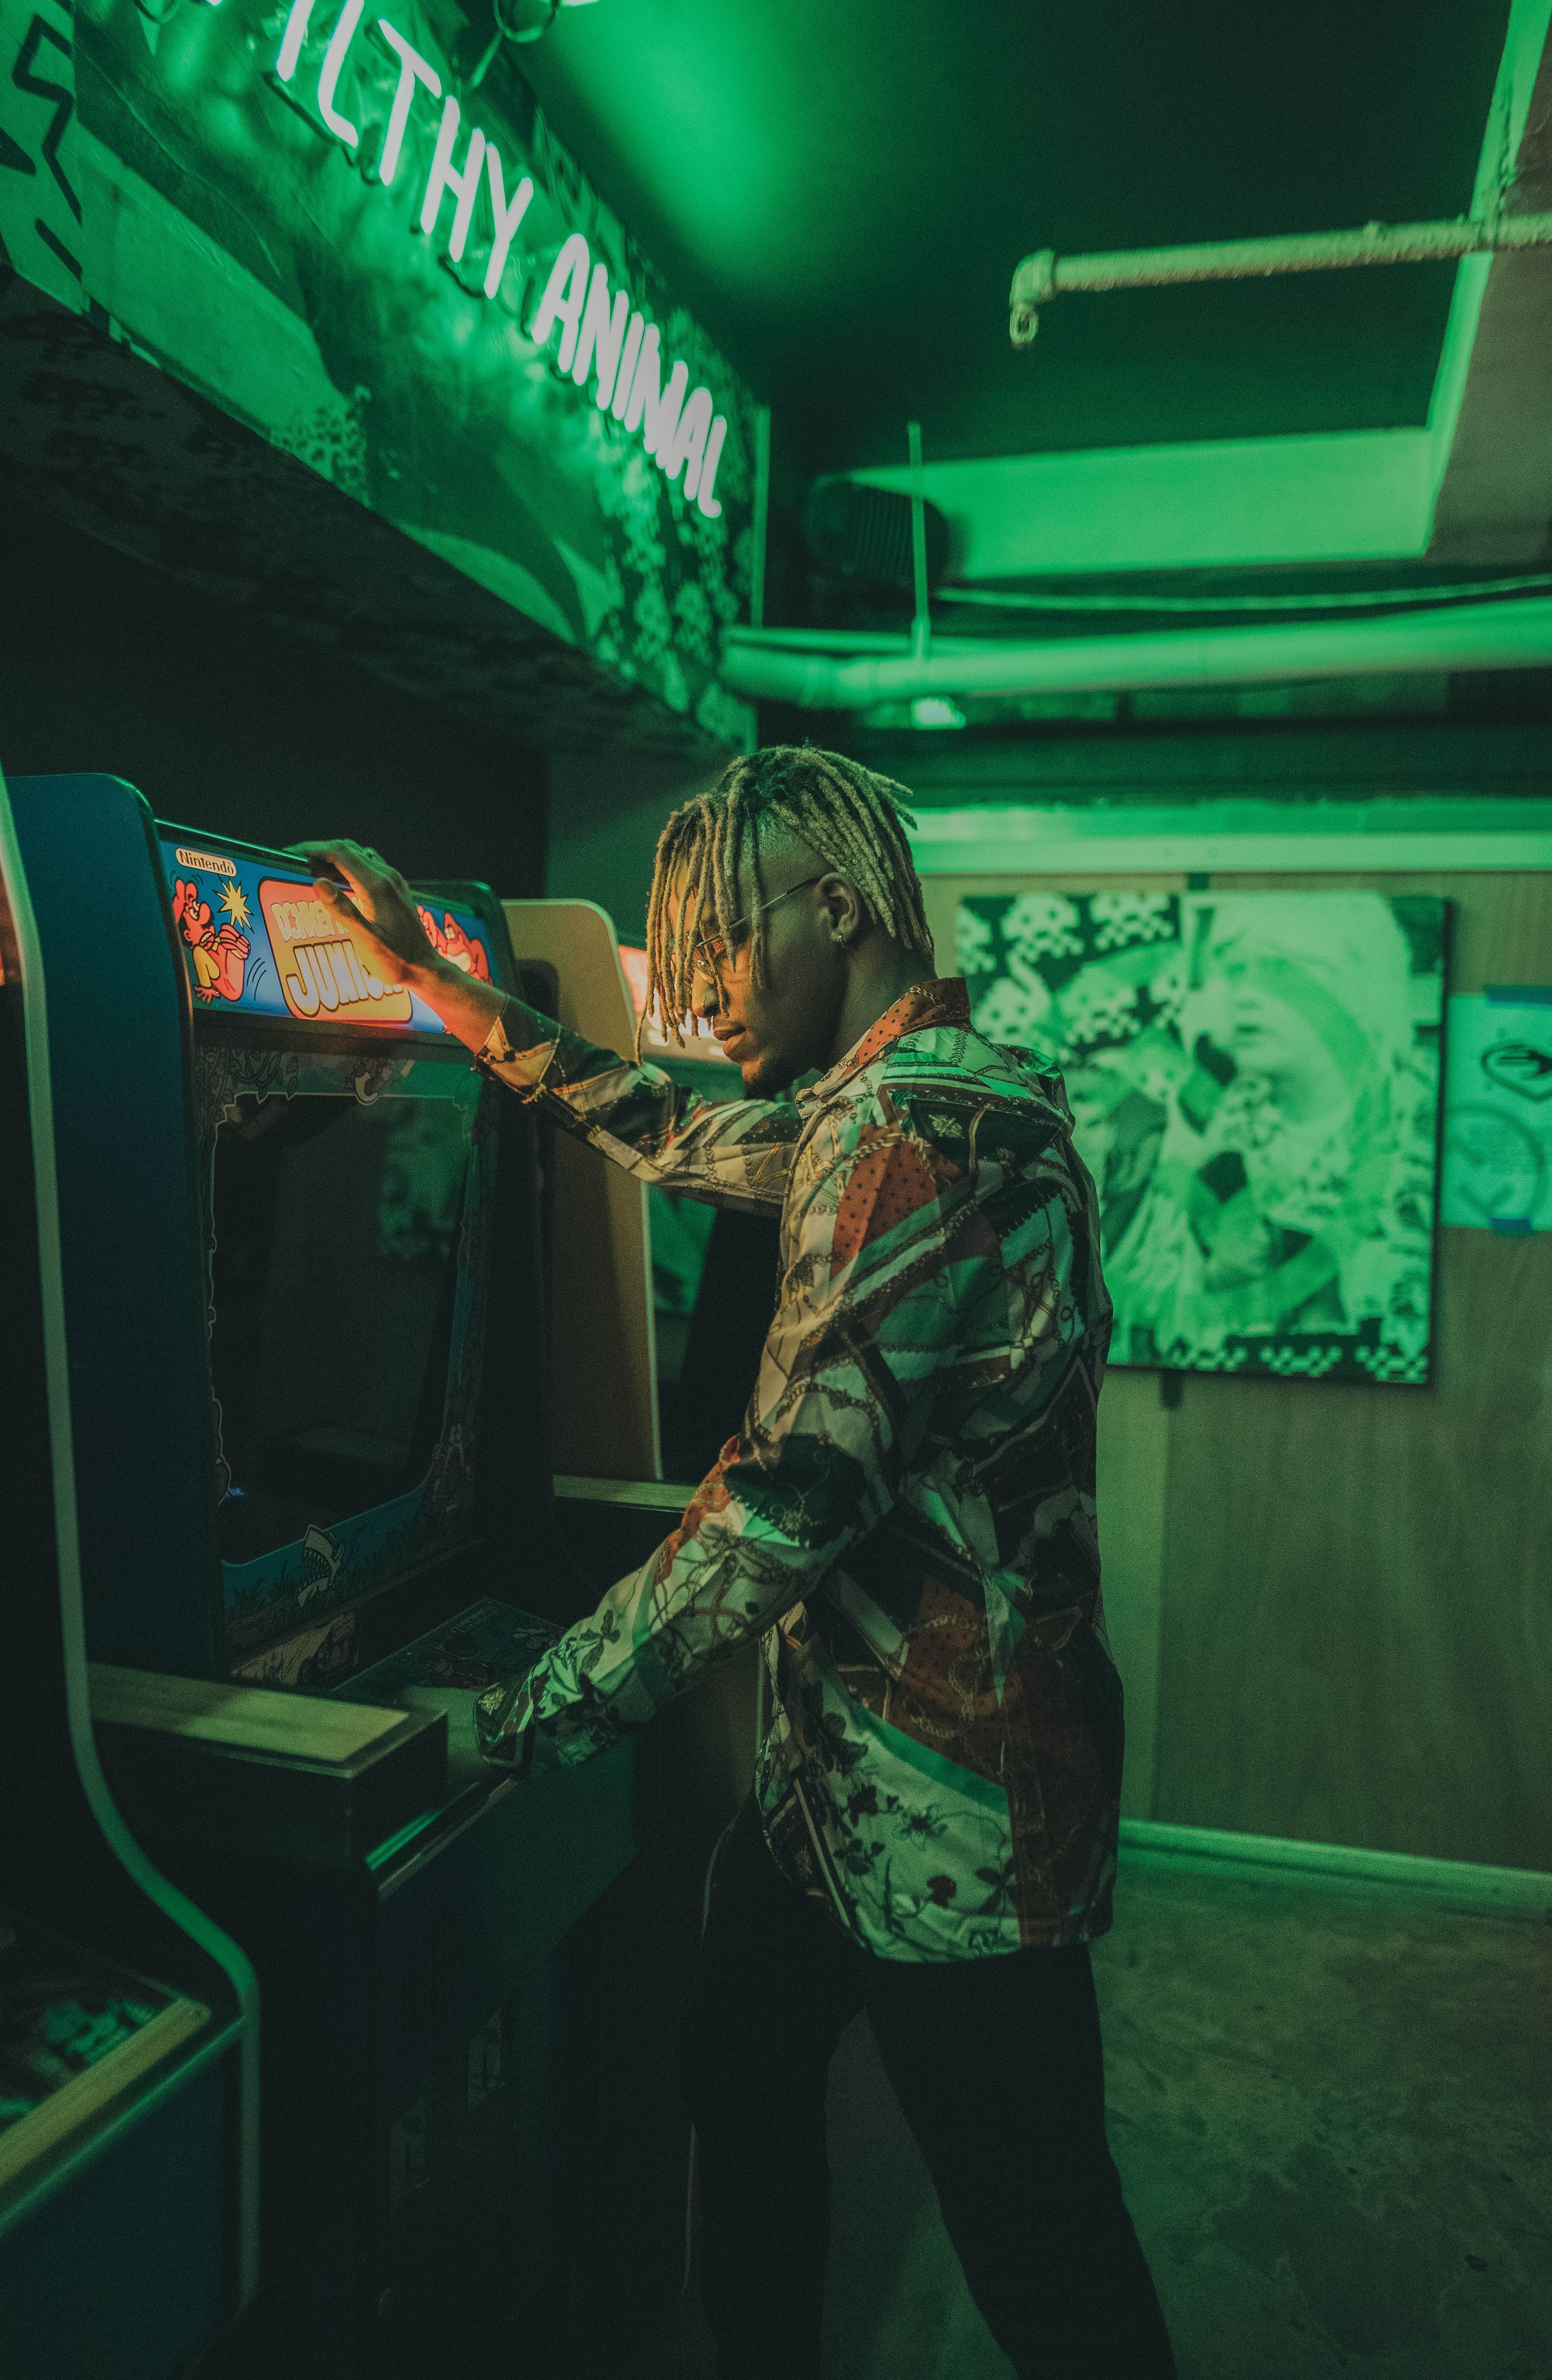 A man in a green lit room playing an arcade game - Arcade